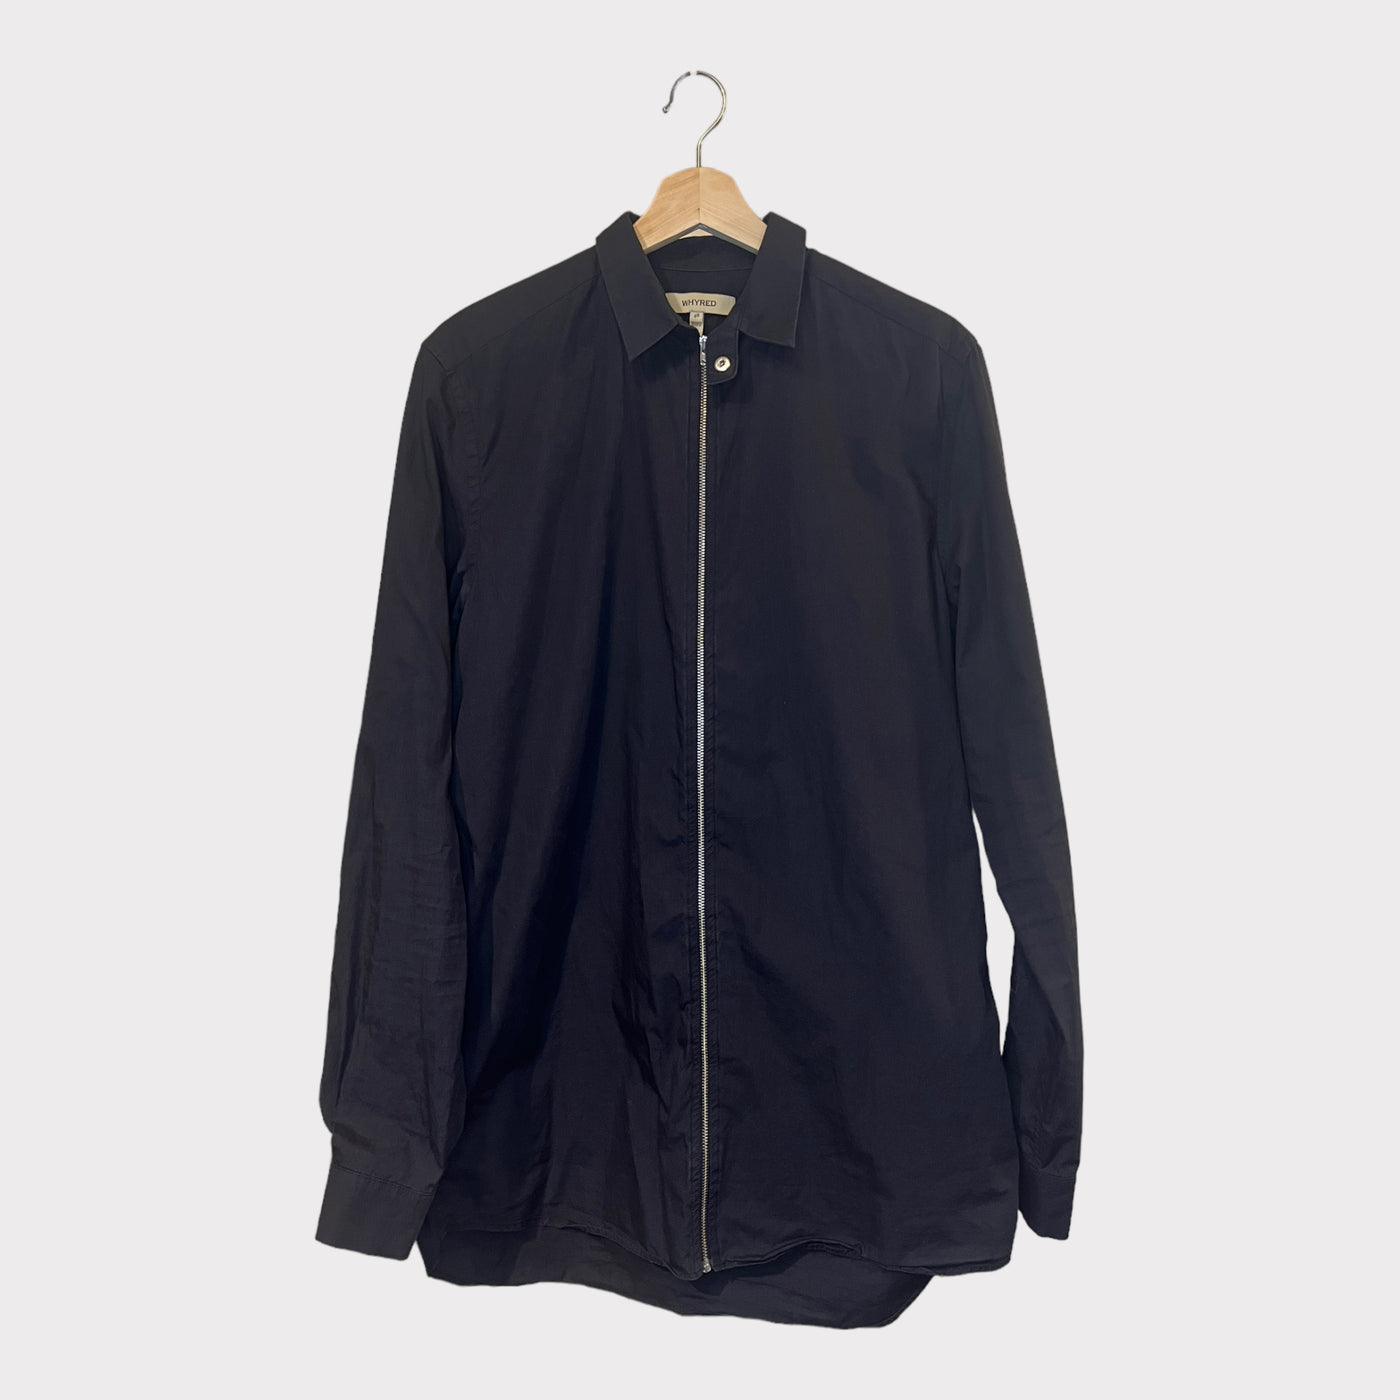 Marlo Zip Shirt From Whyred - Front